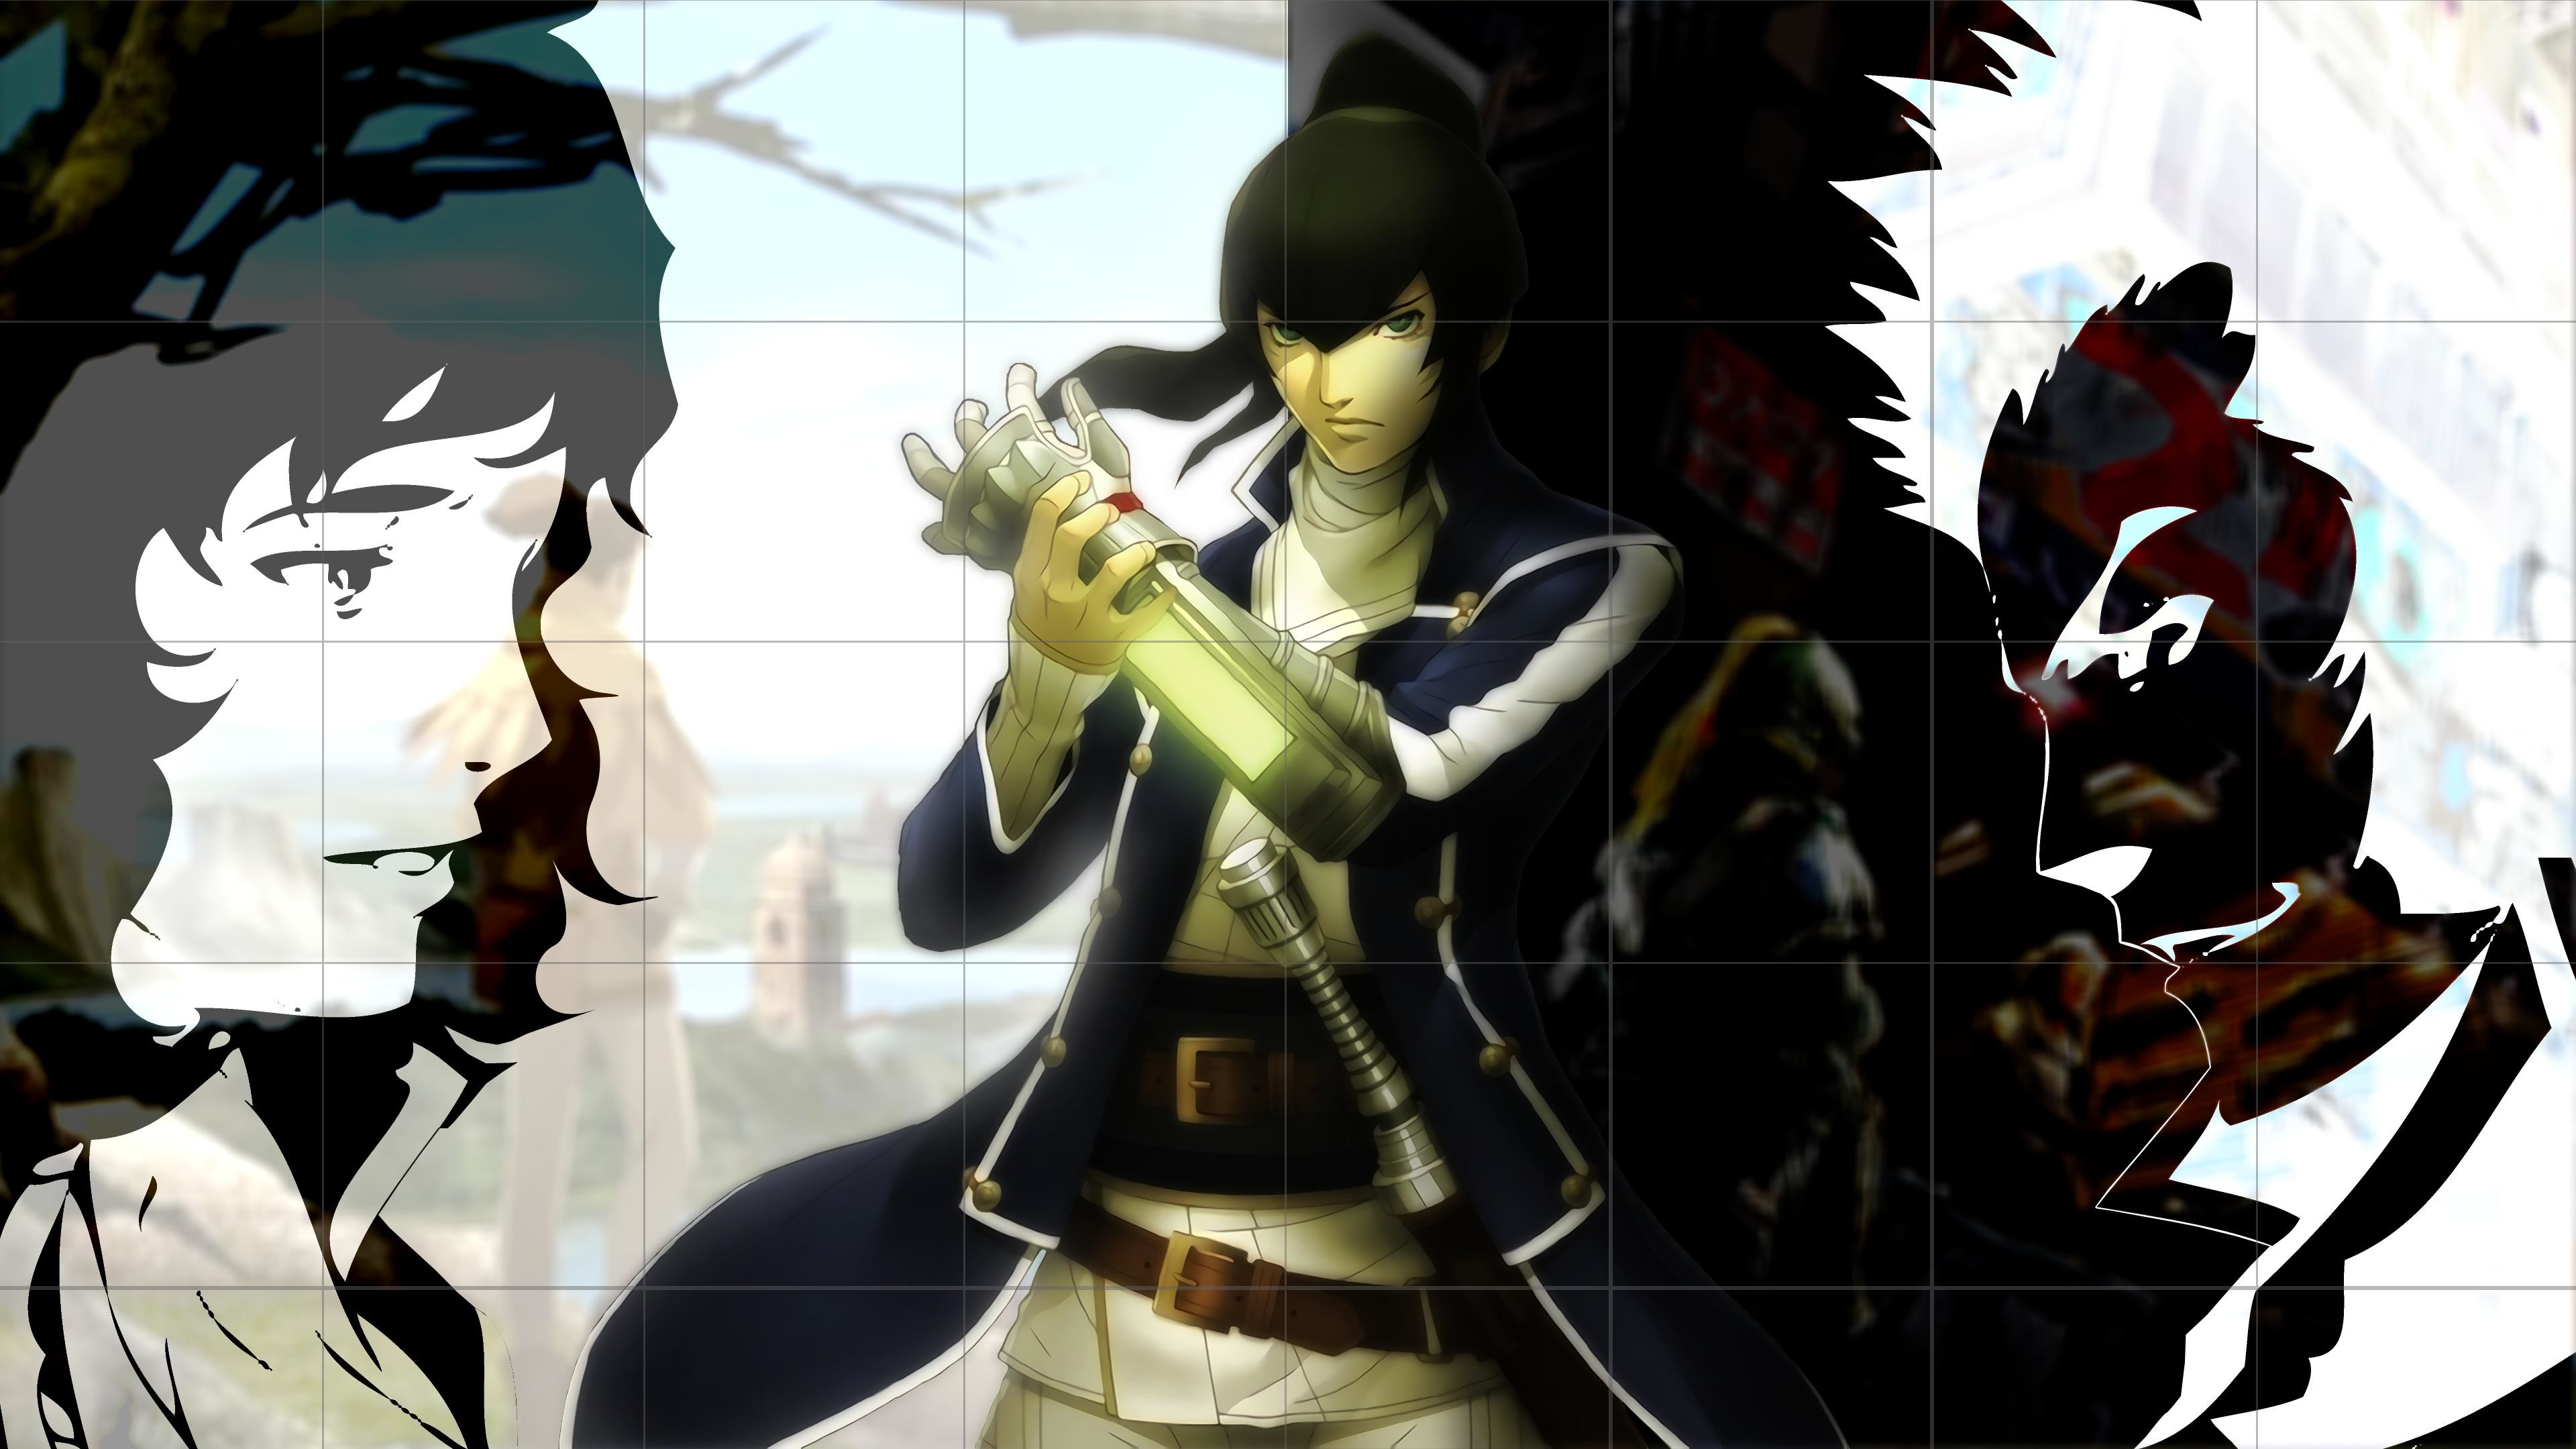 3840x2160 sdds iv - The remake of a very old SMT IV wallpaper of mine.